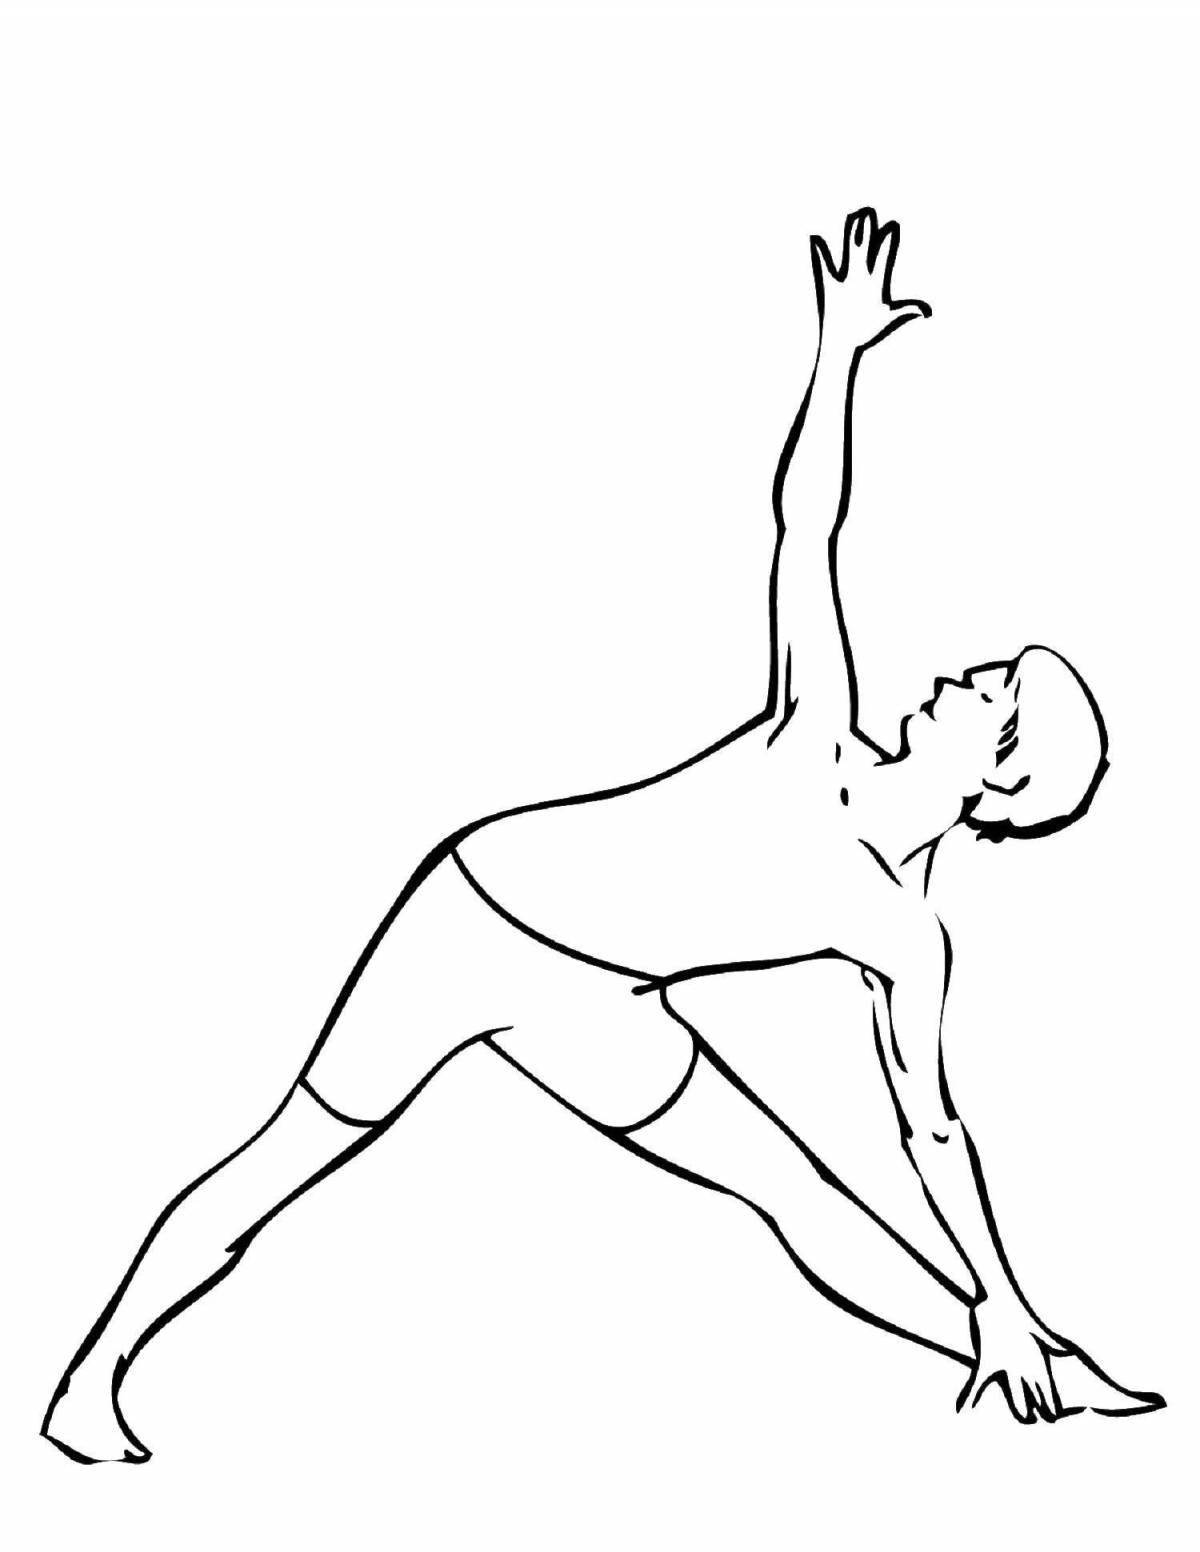 Energetic poses coloring page